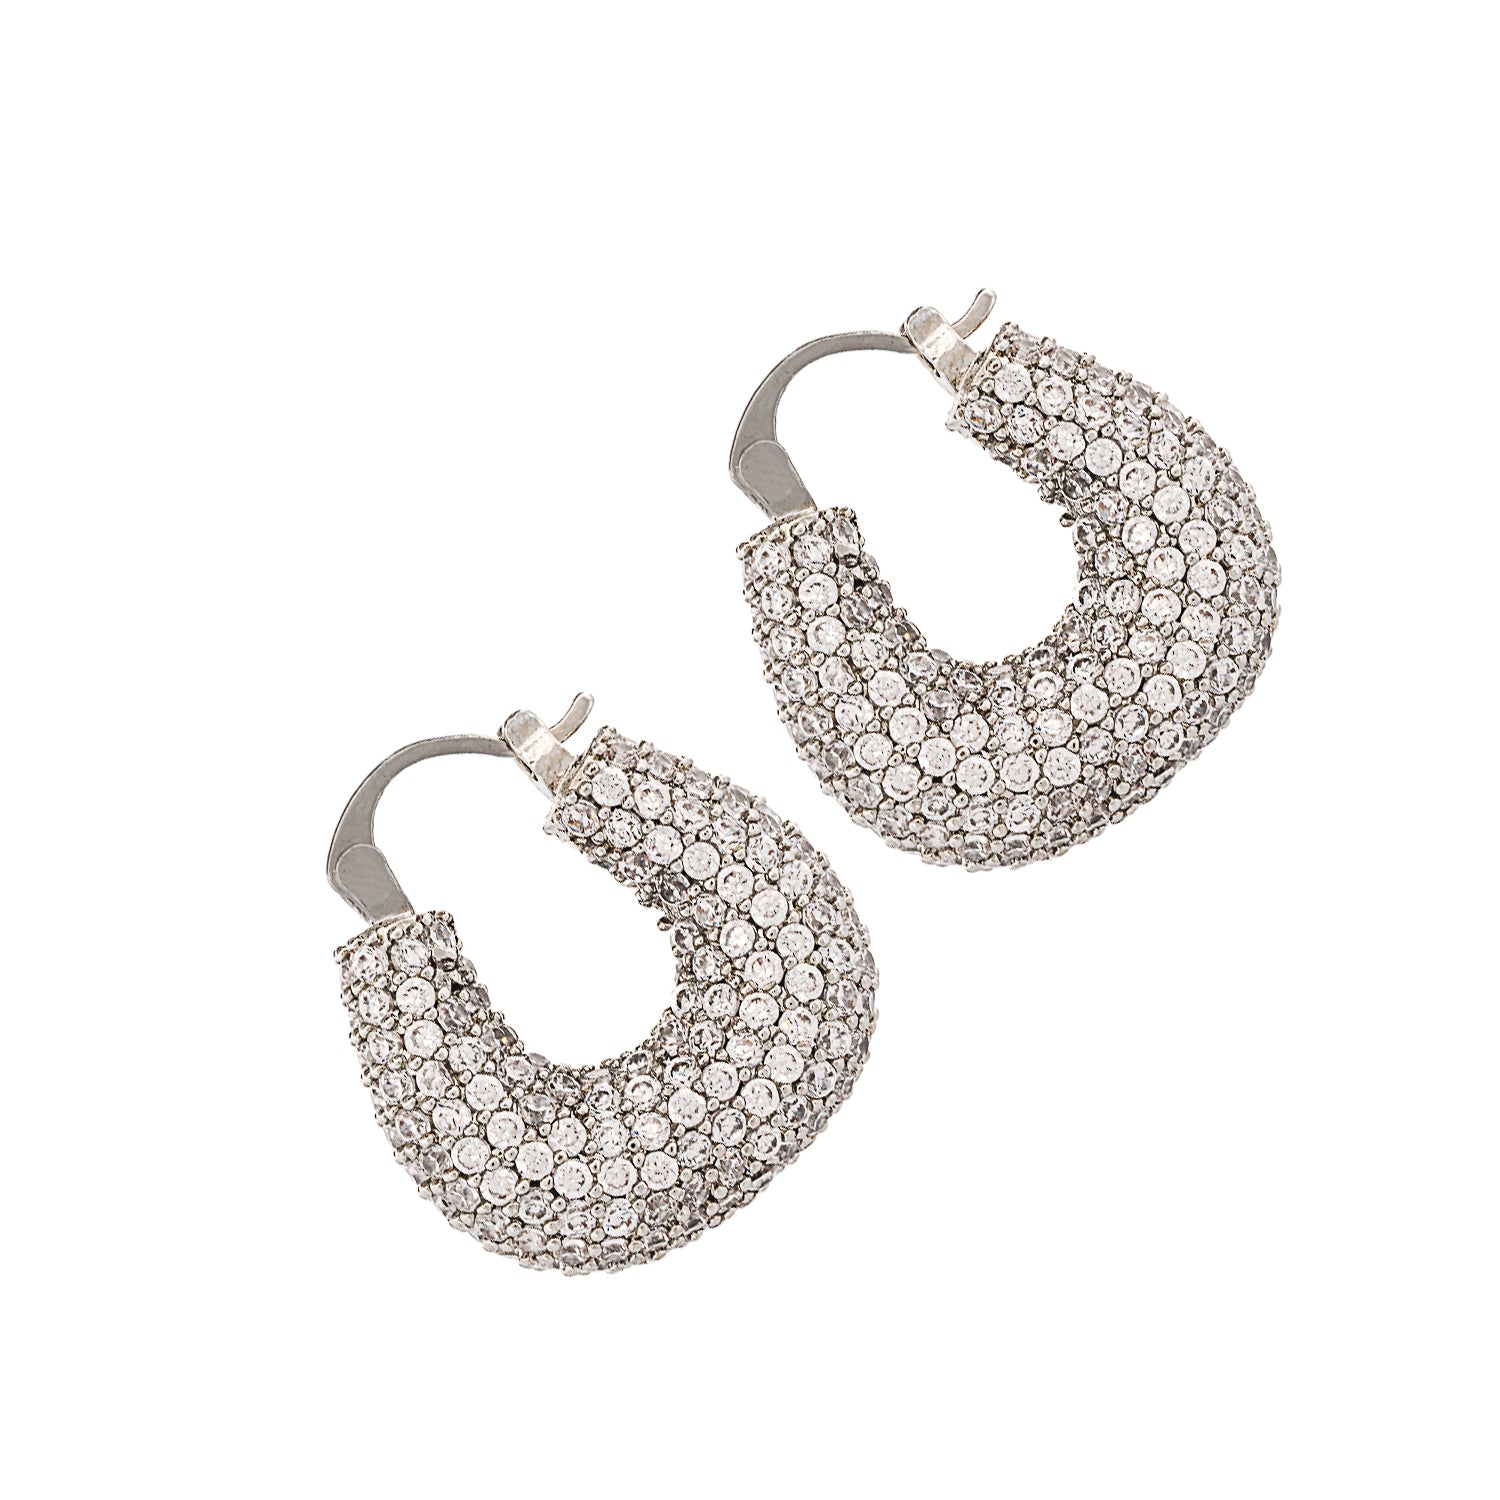 Pave Diamond Silver Sparkly Earrings